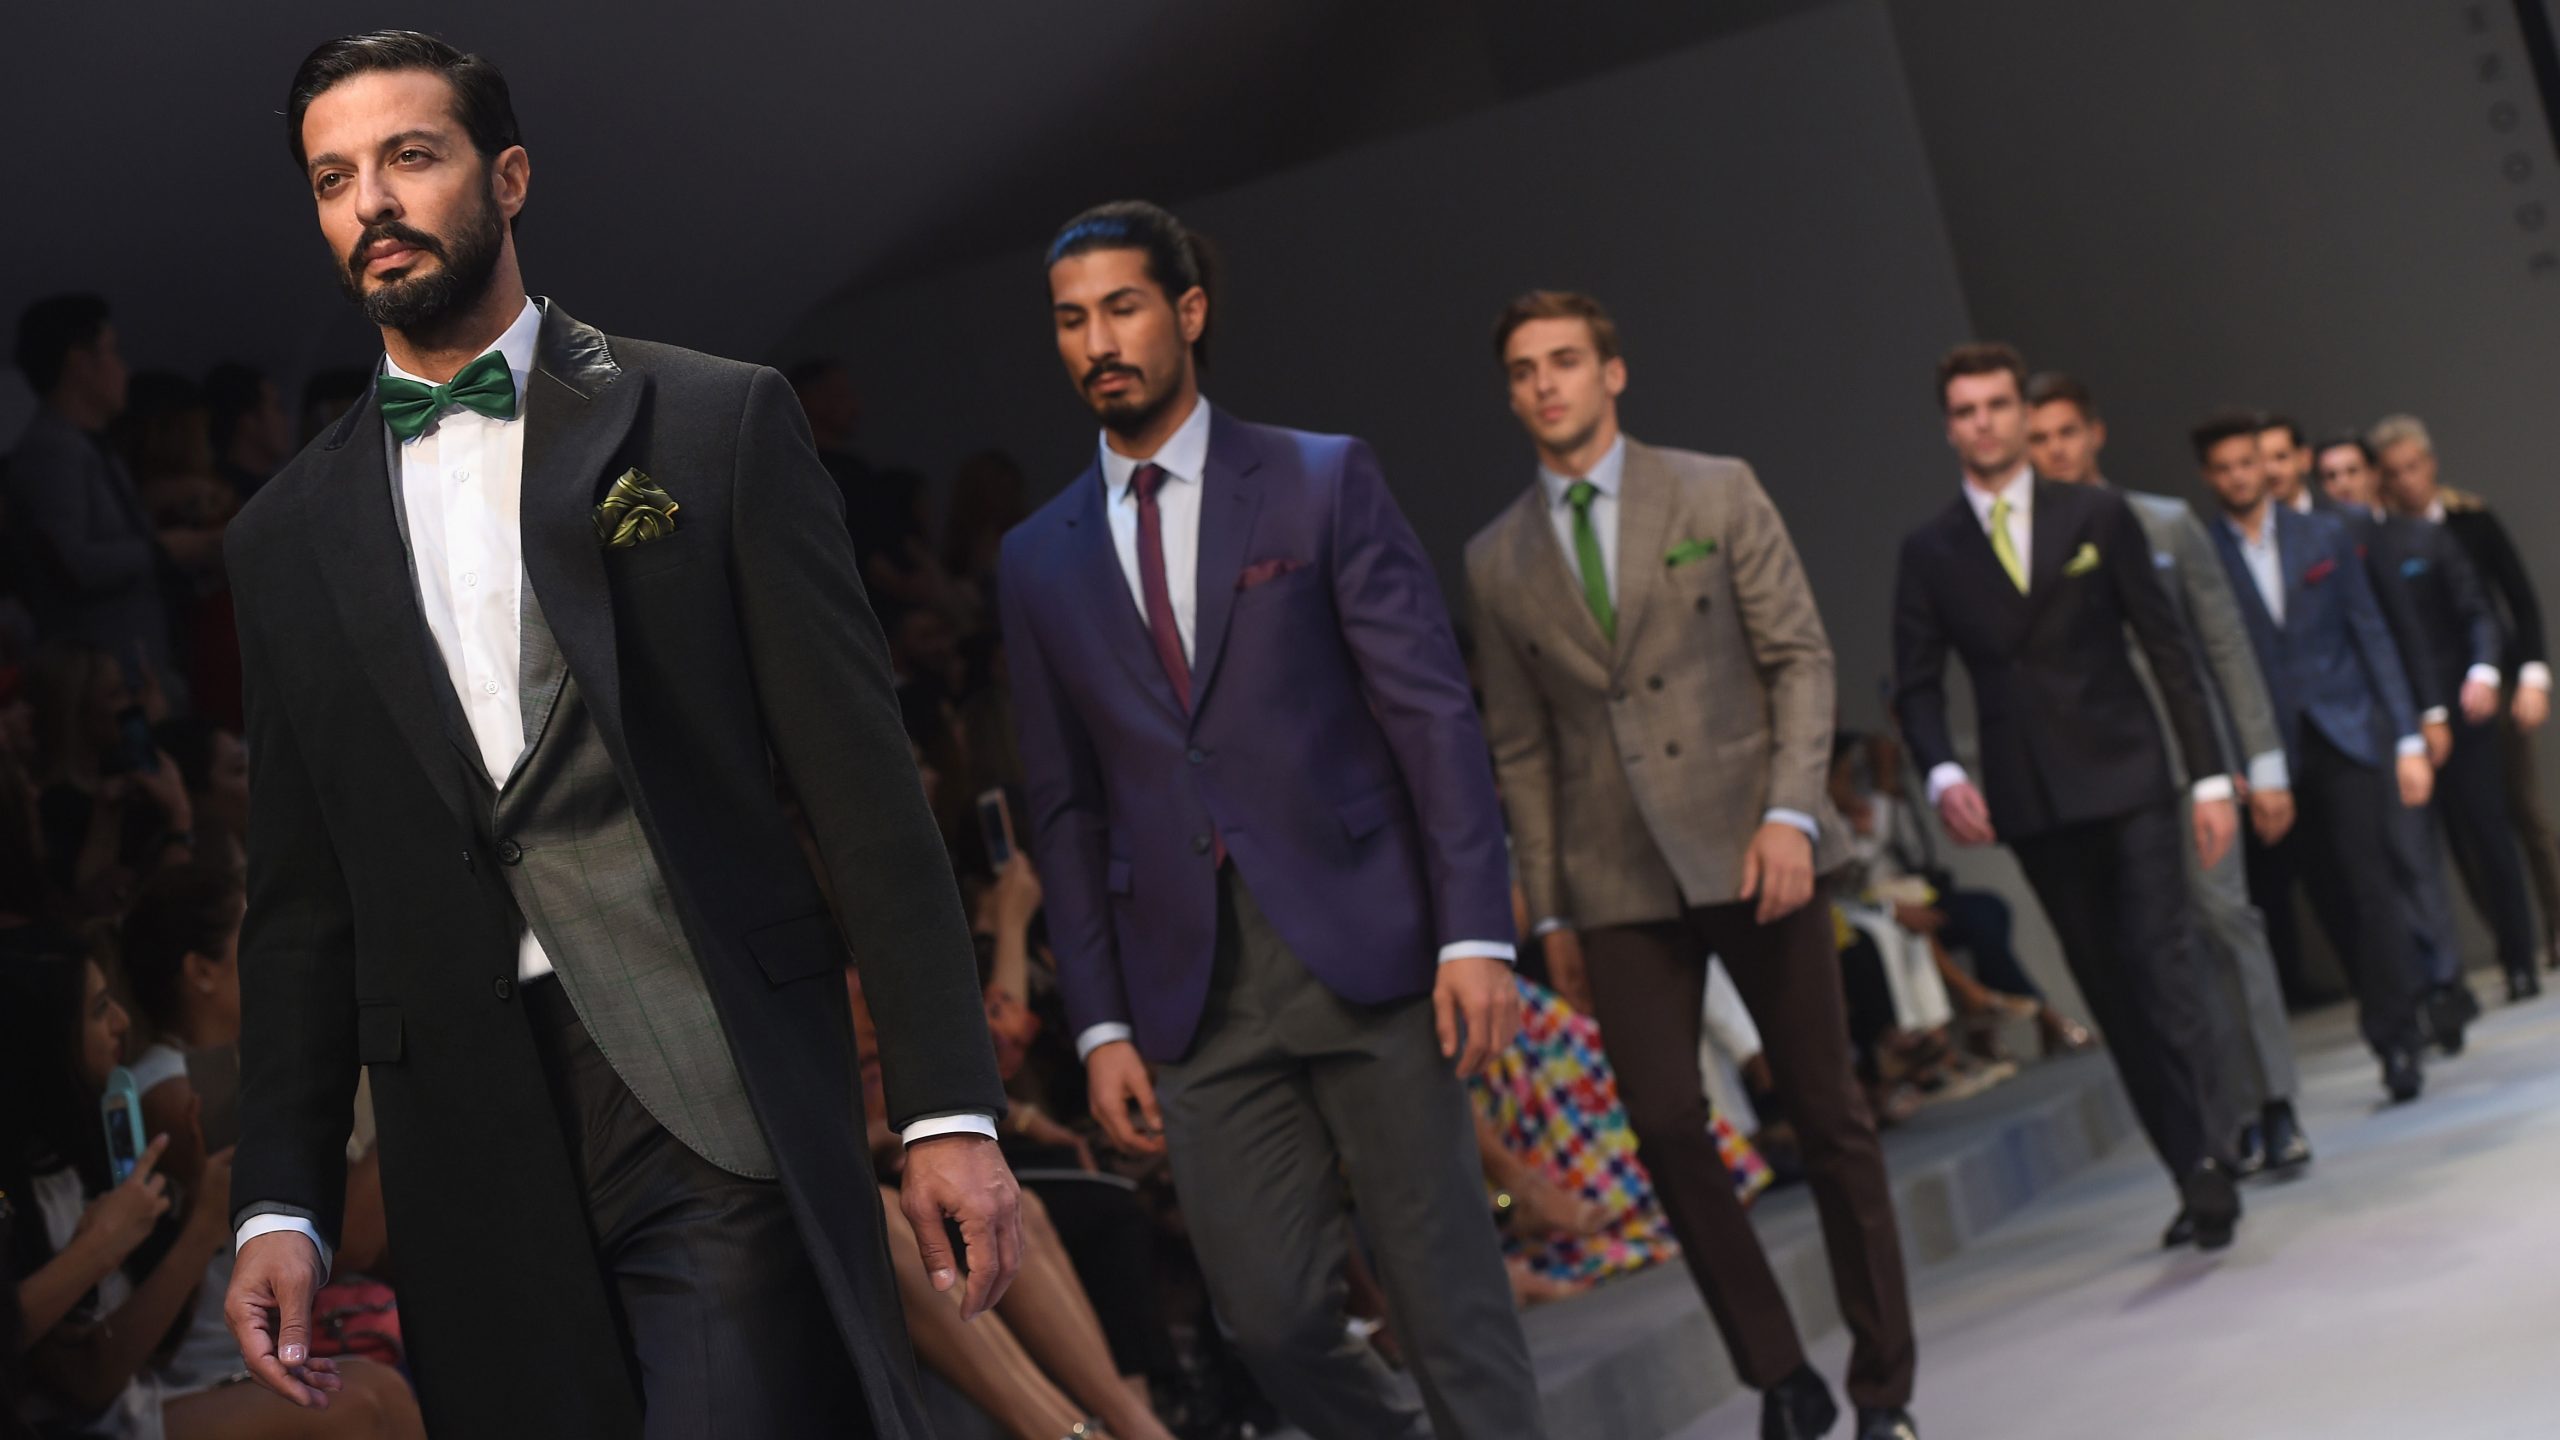 Let's Talk About Why There are so Few Menswear Designers in the Region ...